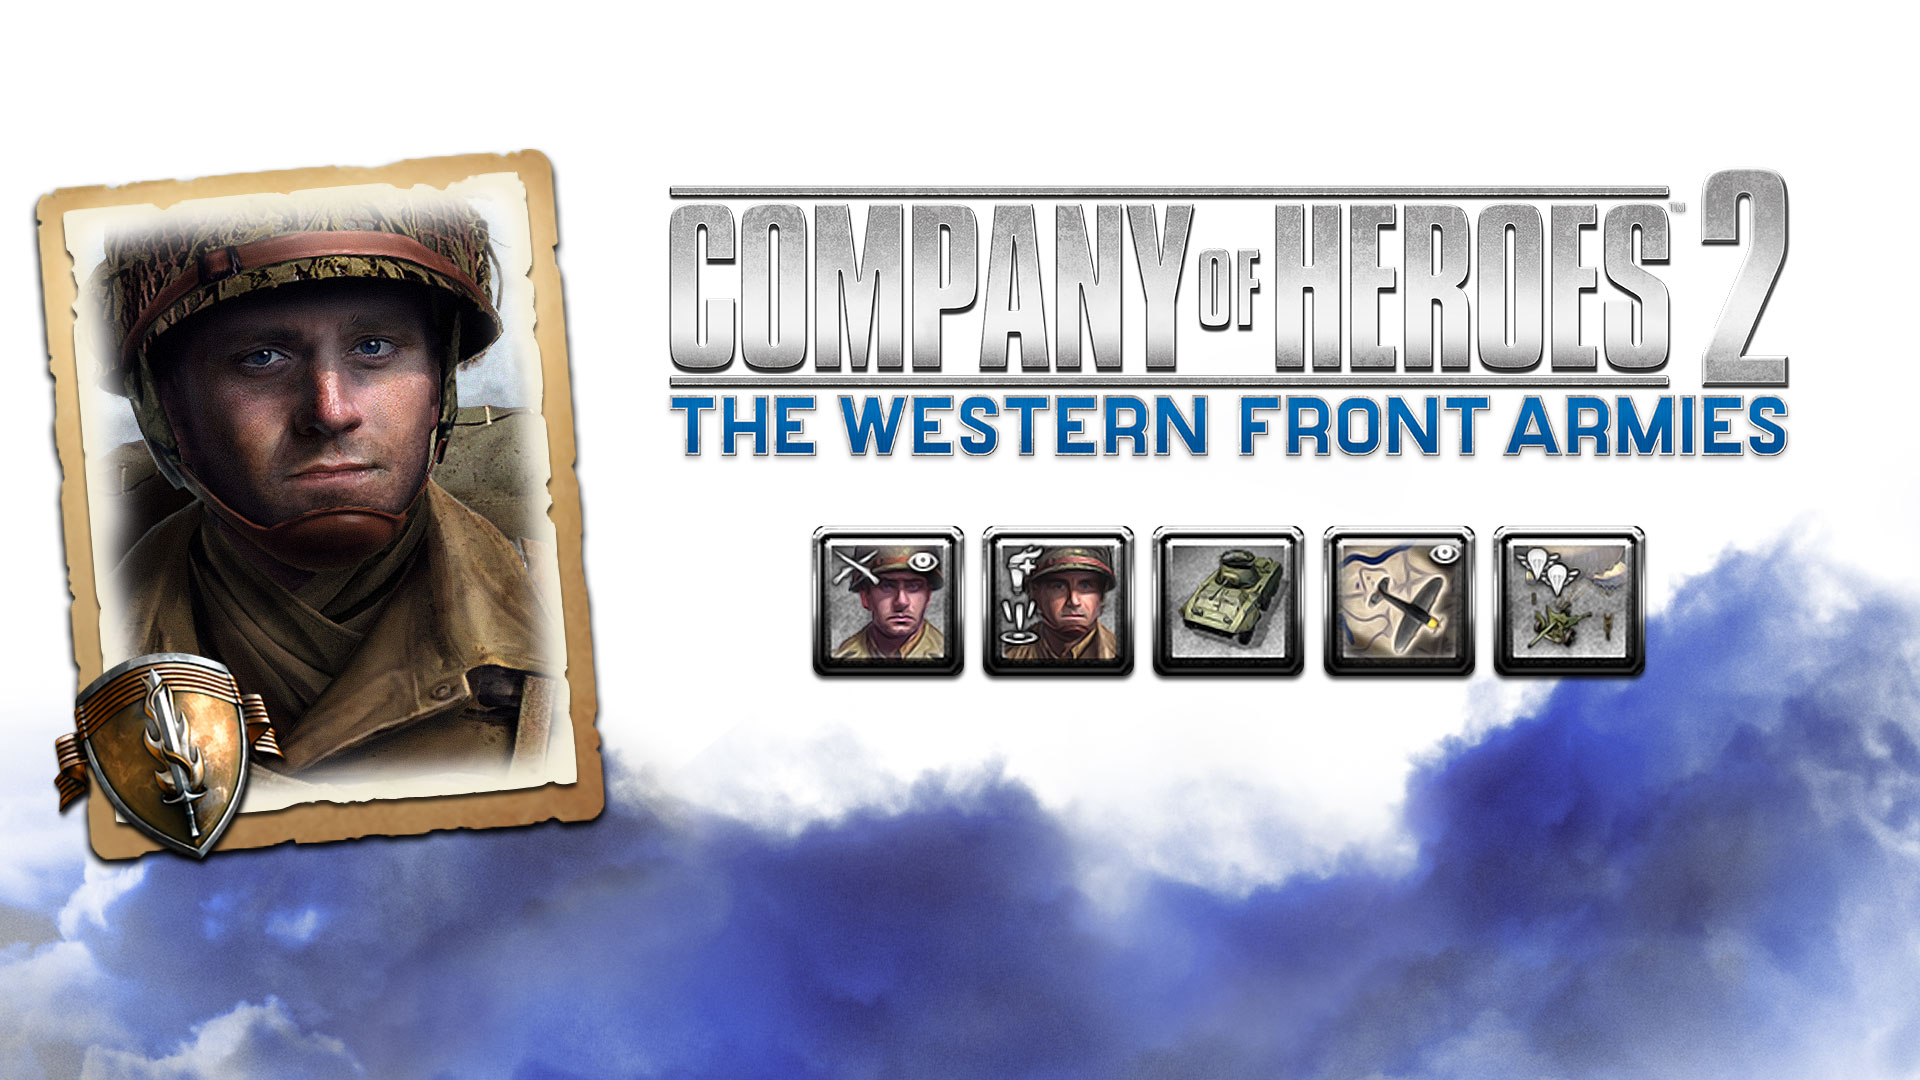 Company of Heroes 2 - US Forces Commander: Recon Support Company DLC Steam CD Key, 10.16$